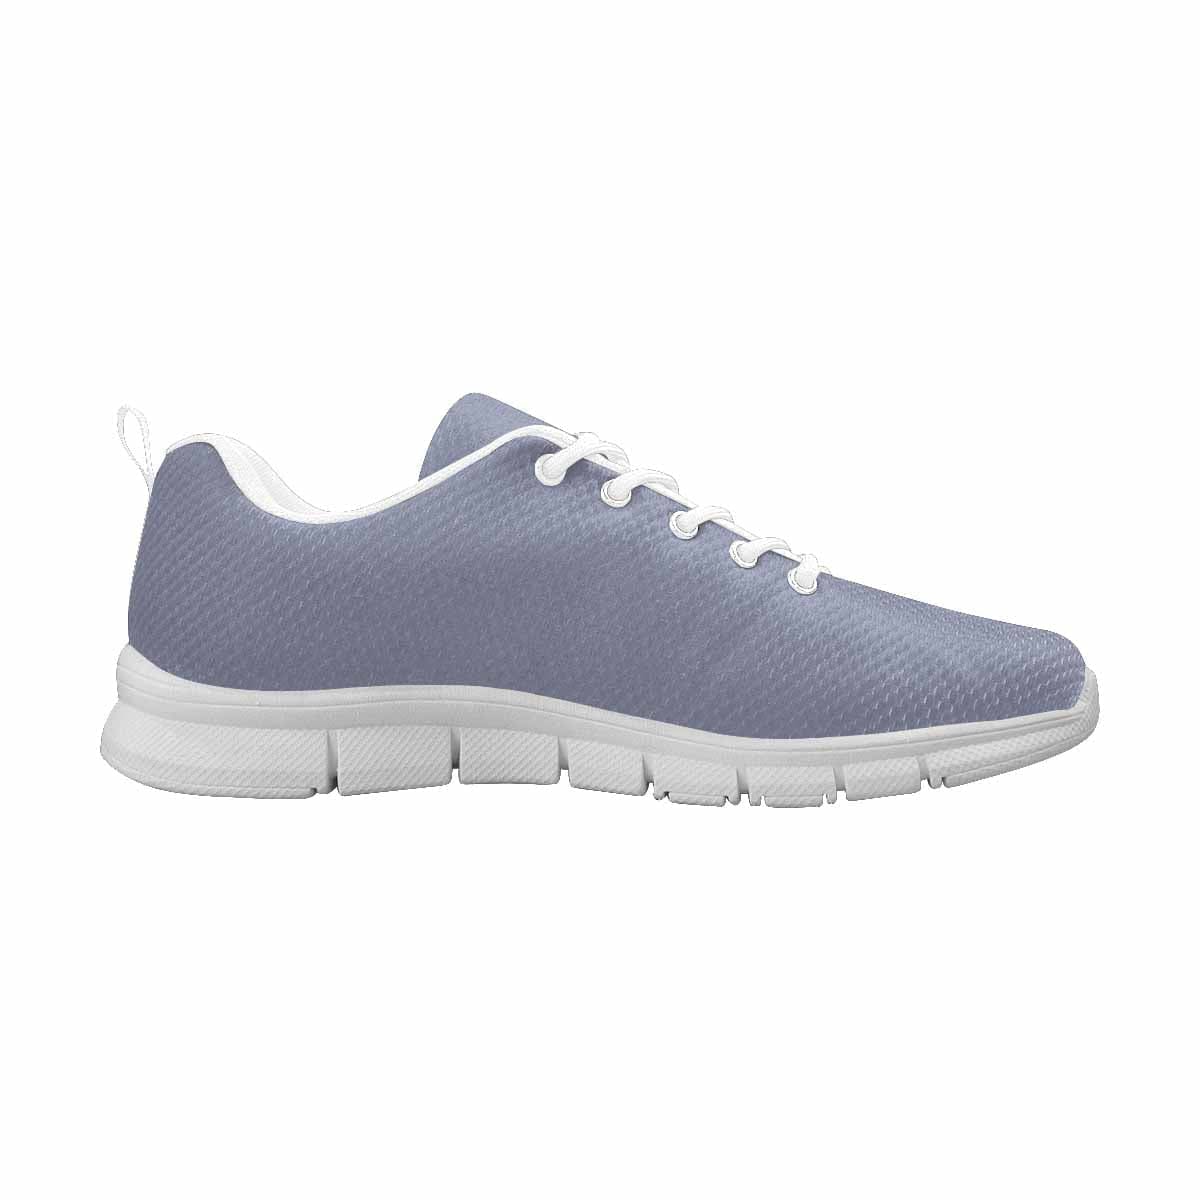 Sneakers For Men Cool Grey - Canvas Mesh Athletic Running Shoes - Mens